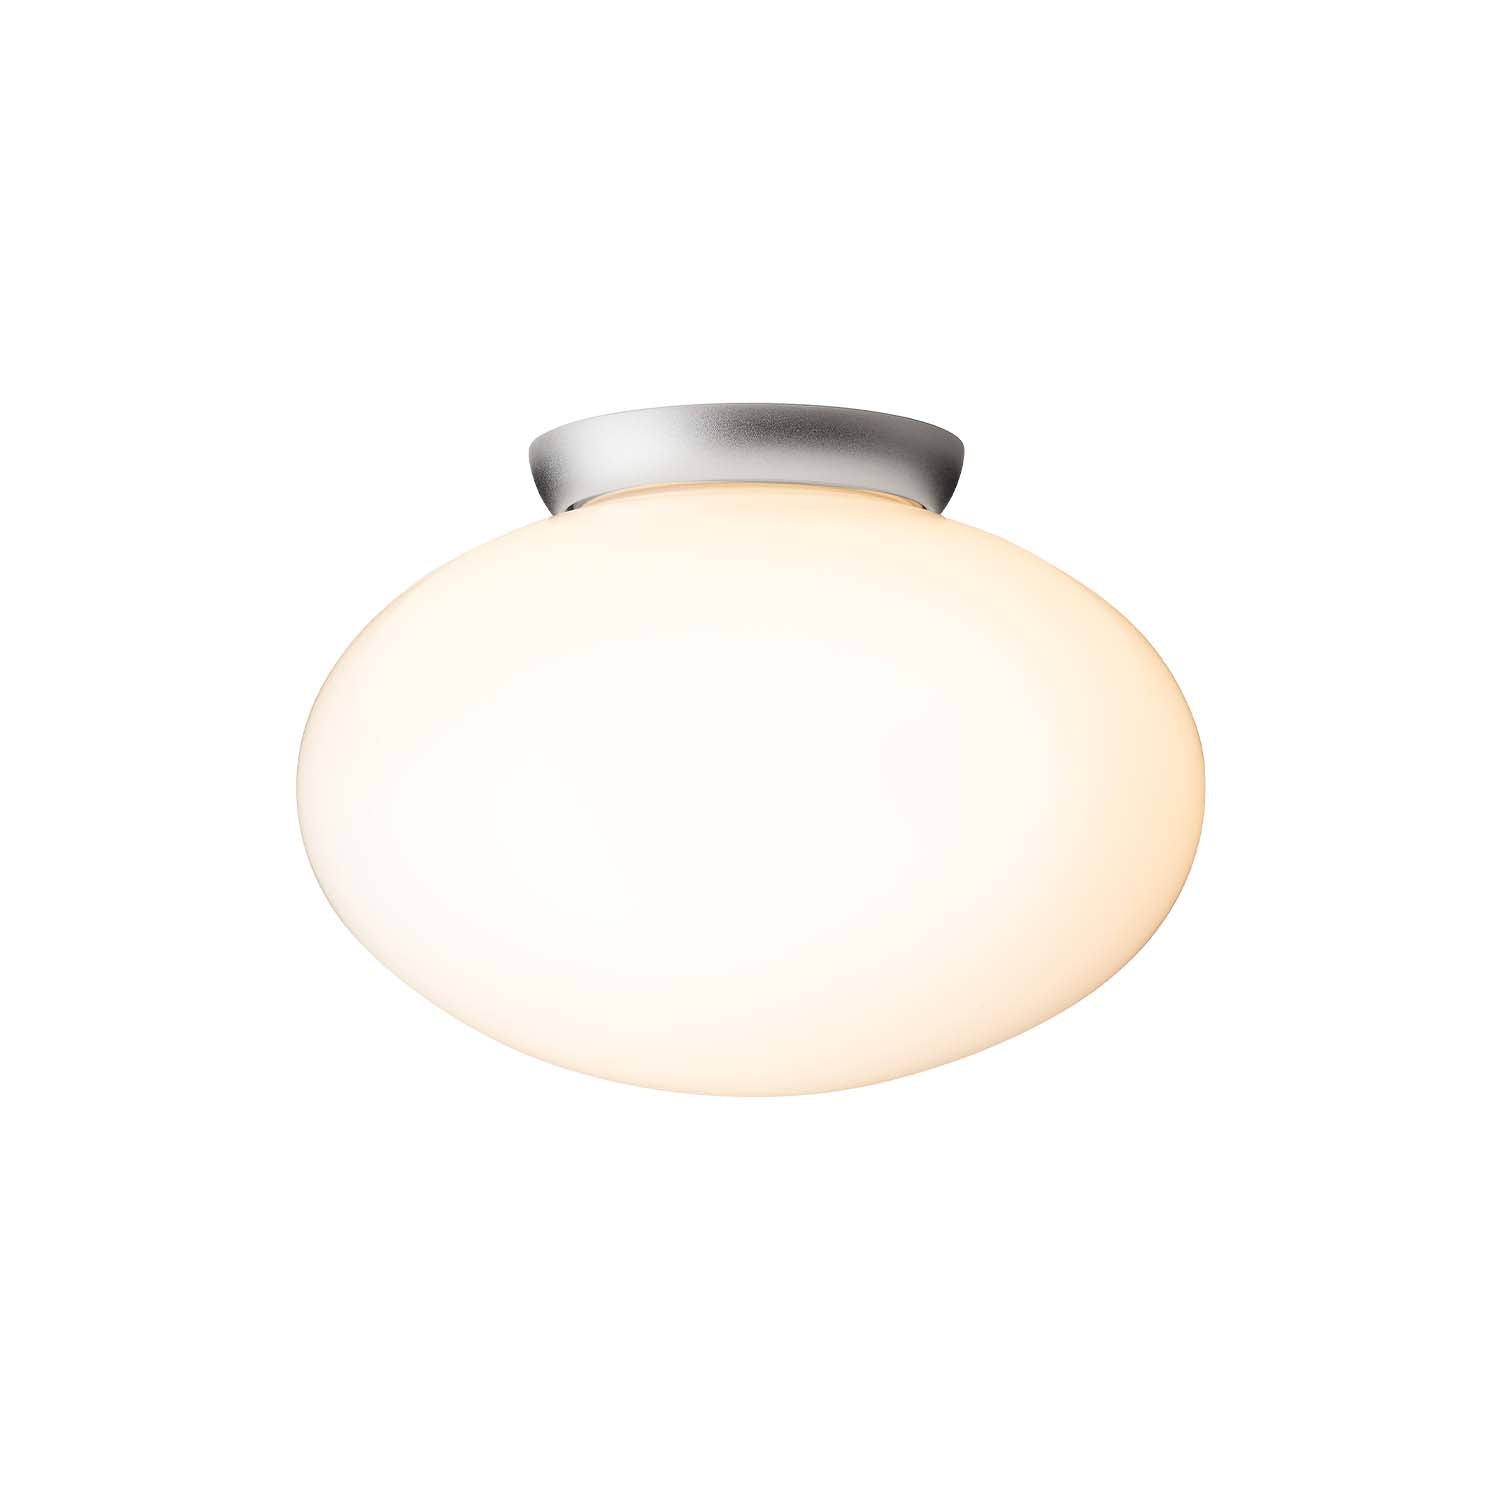 RIZZATTO 301 - Ellipse white glass ceiling lamp, design and cocooning